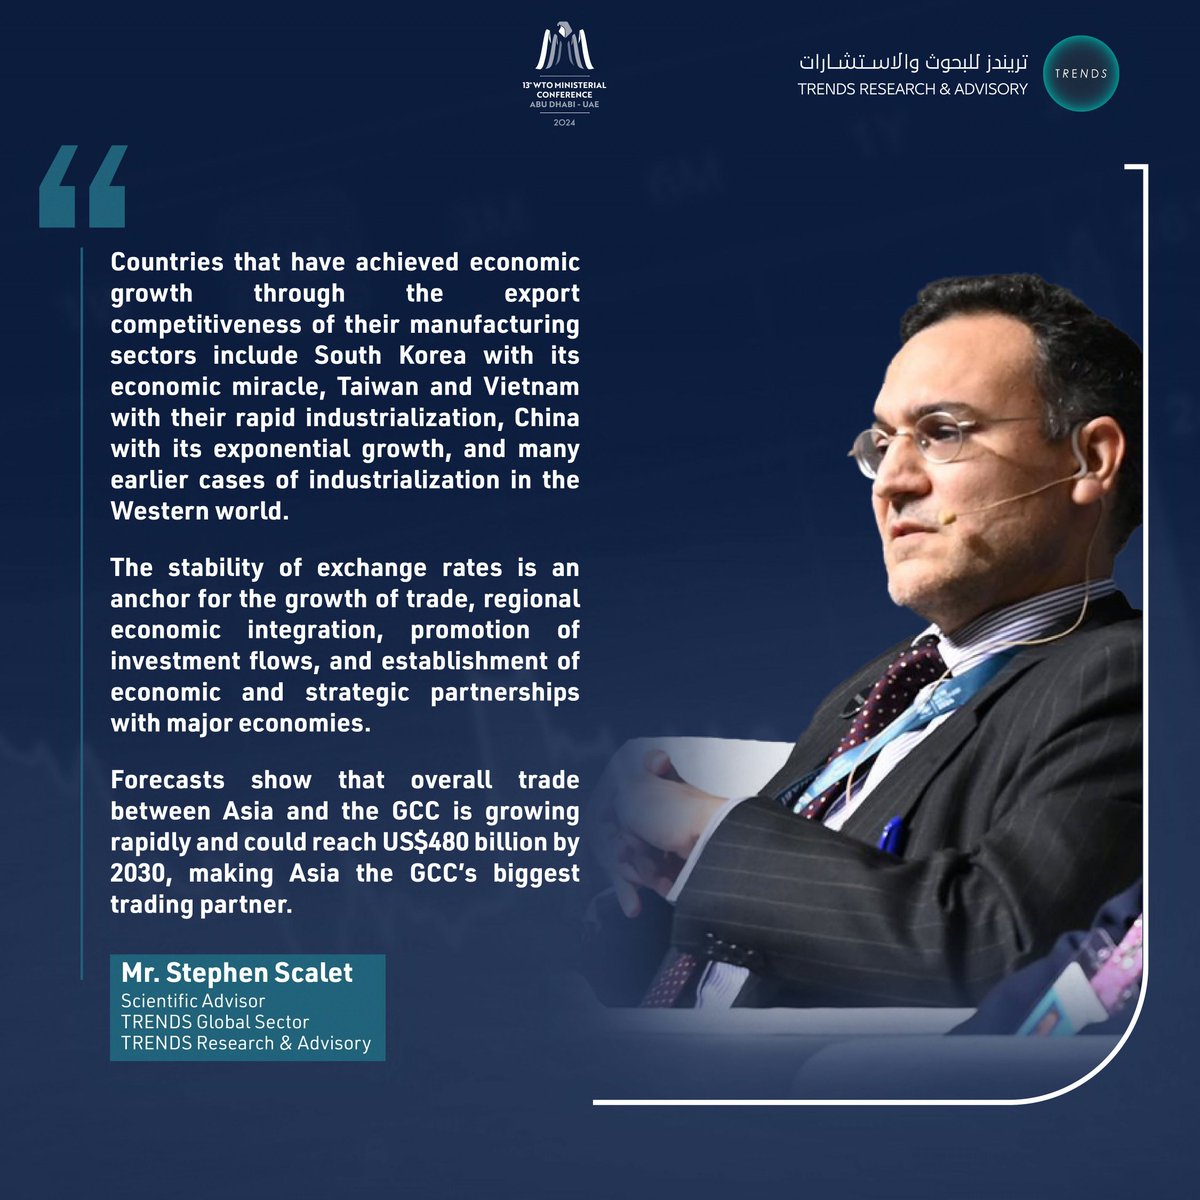 Mr. Stephen Scalet, Scientific Advisor at TRENDS - The panel discussion: Free Trade and Challenges to Economic Regional Integration.

#Knowledge_Empowers_Future #WTOConference #FreeTradeAgreement #RegionalEconomicIntegration #TradeChallenges #GlobalTradeForum #TradePolicy